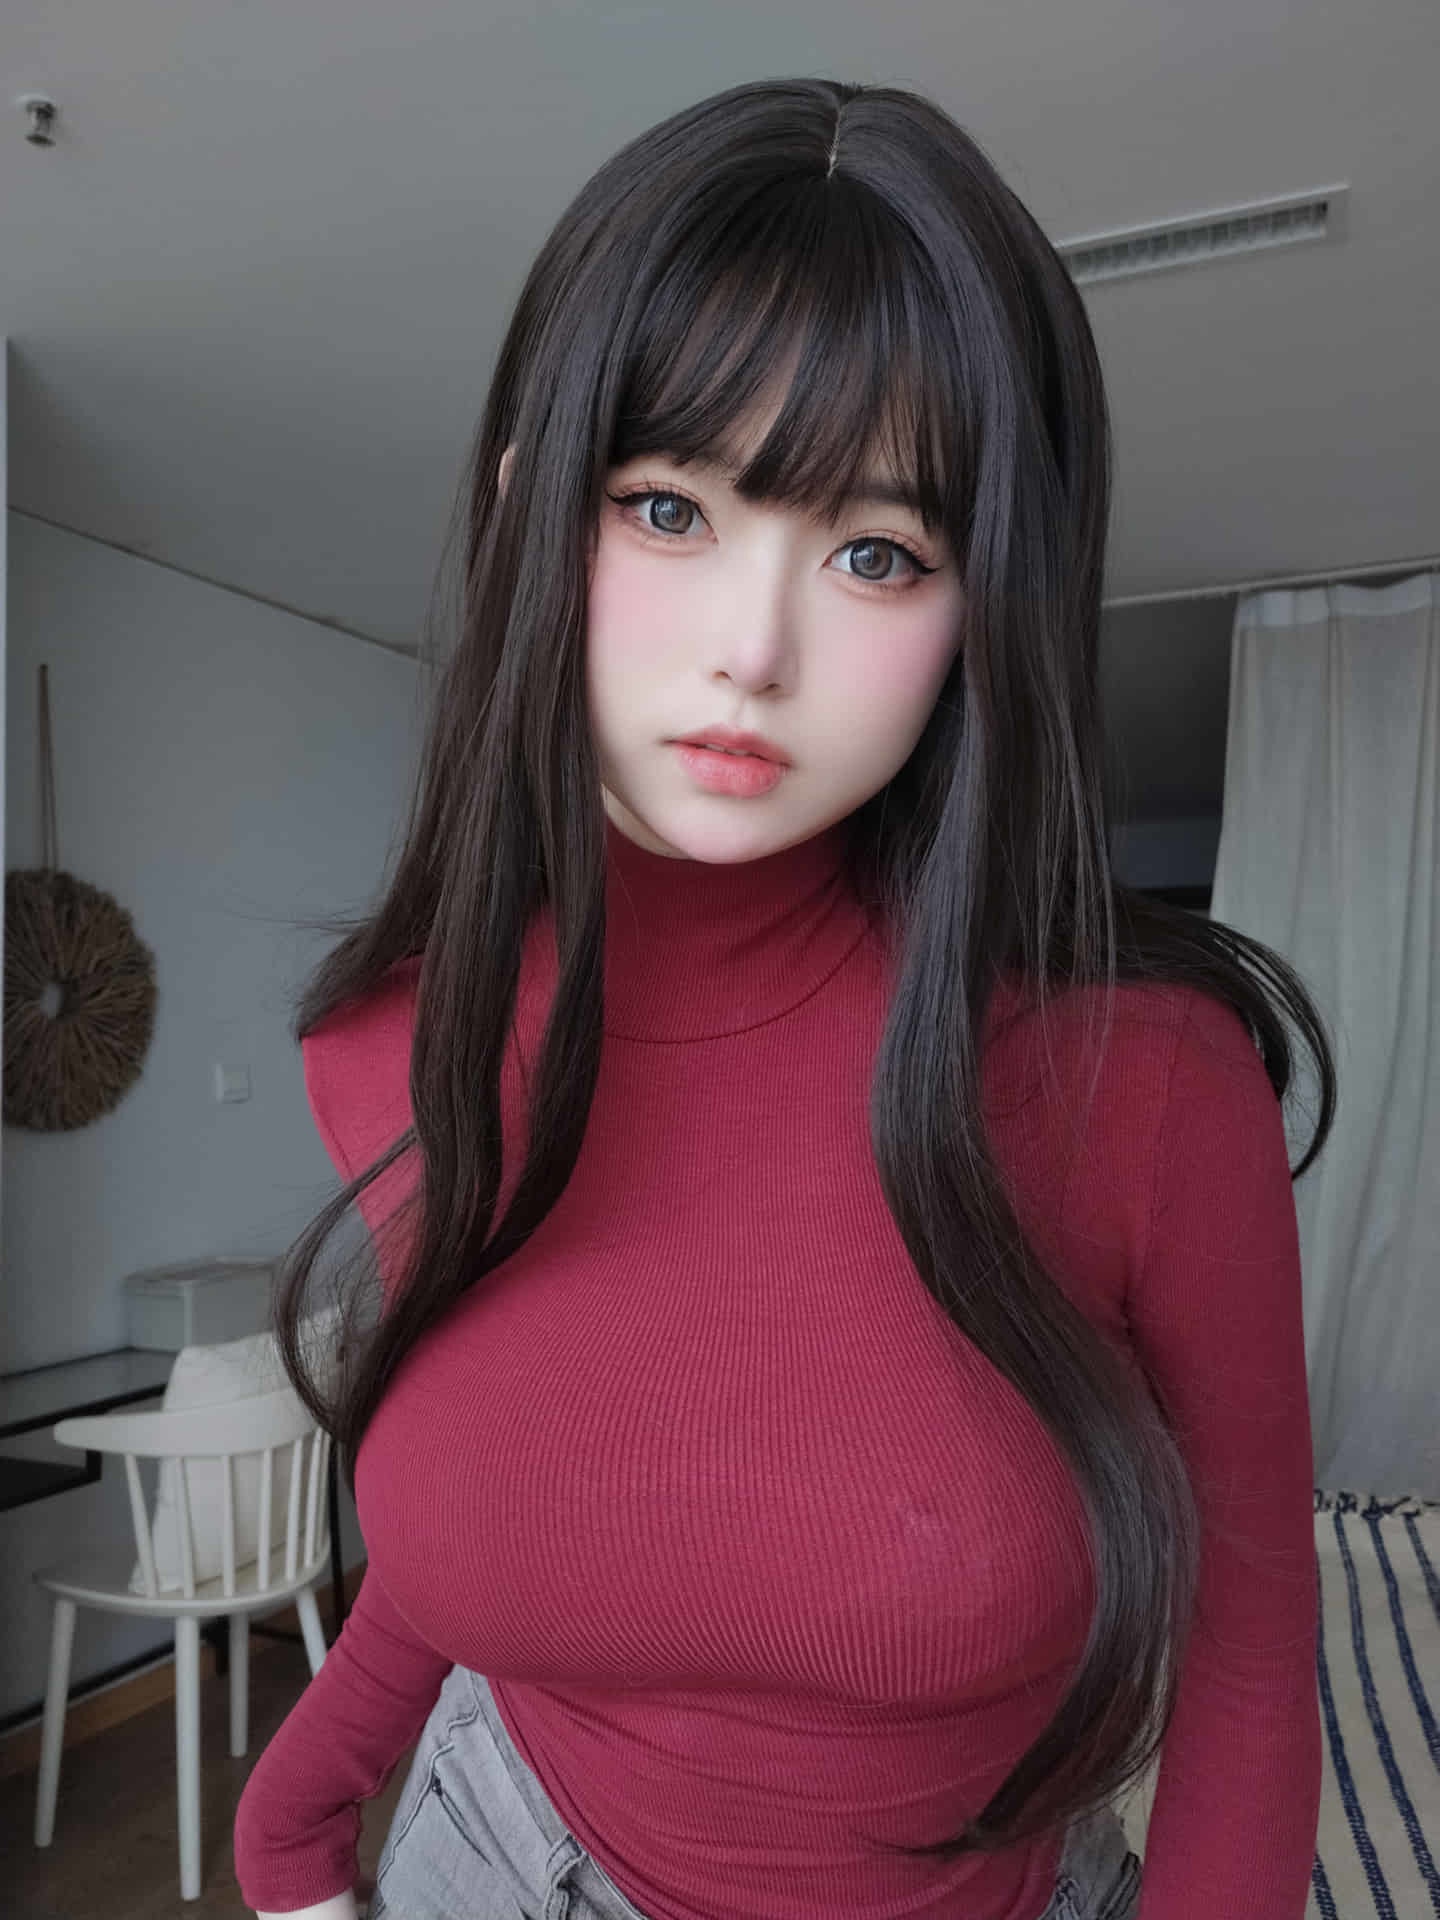 The heroine K NO.09 The plump sister in the red sweater